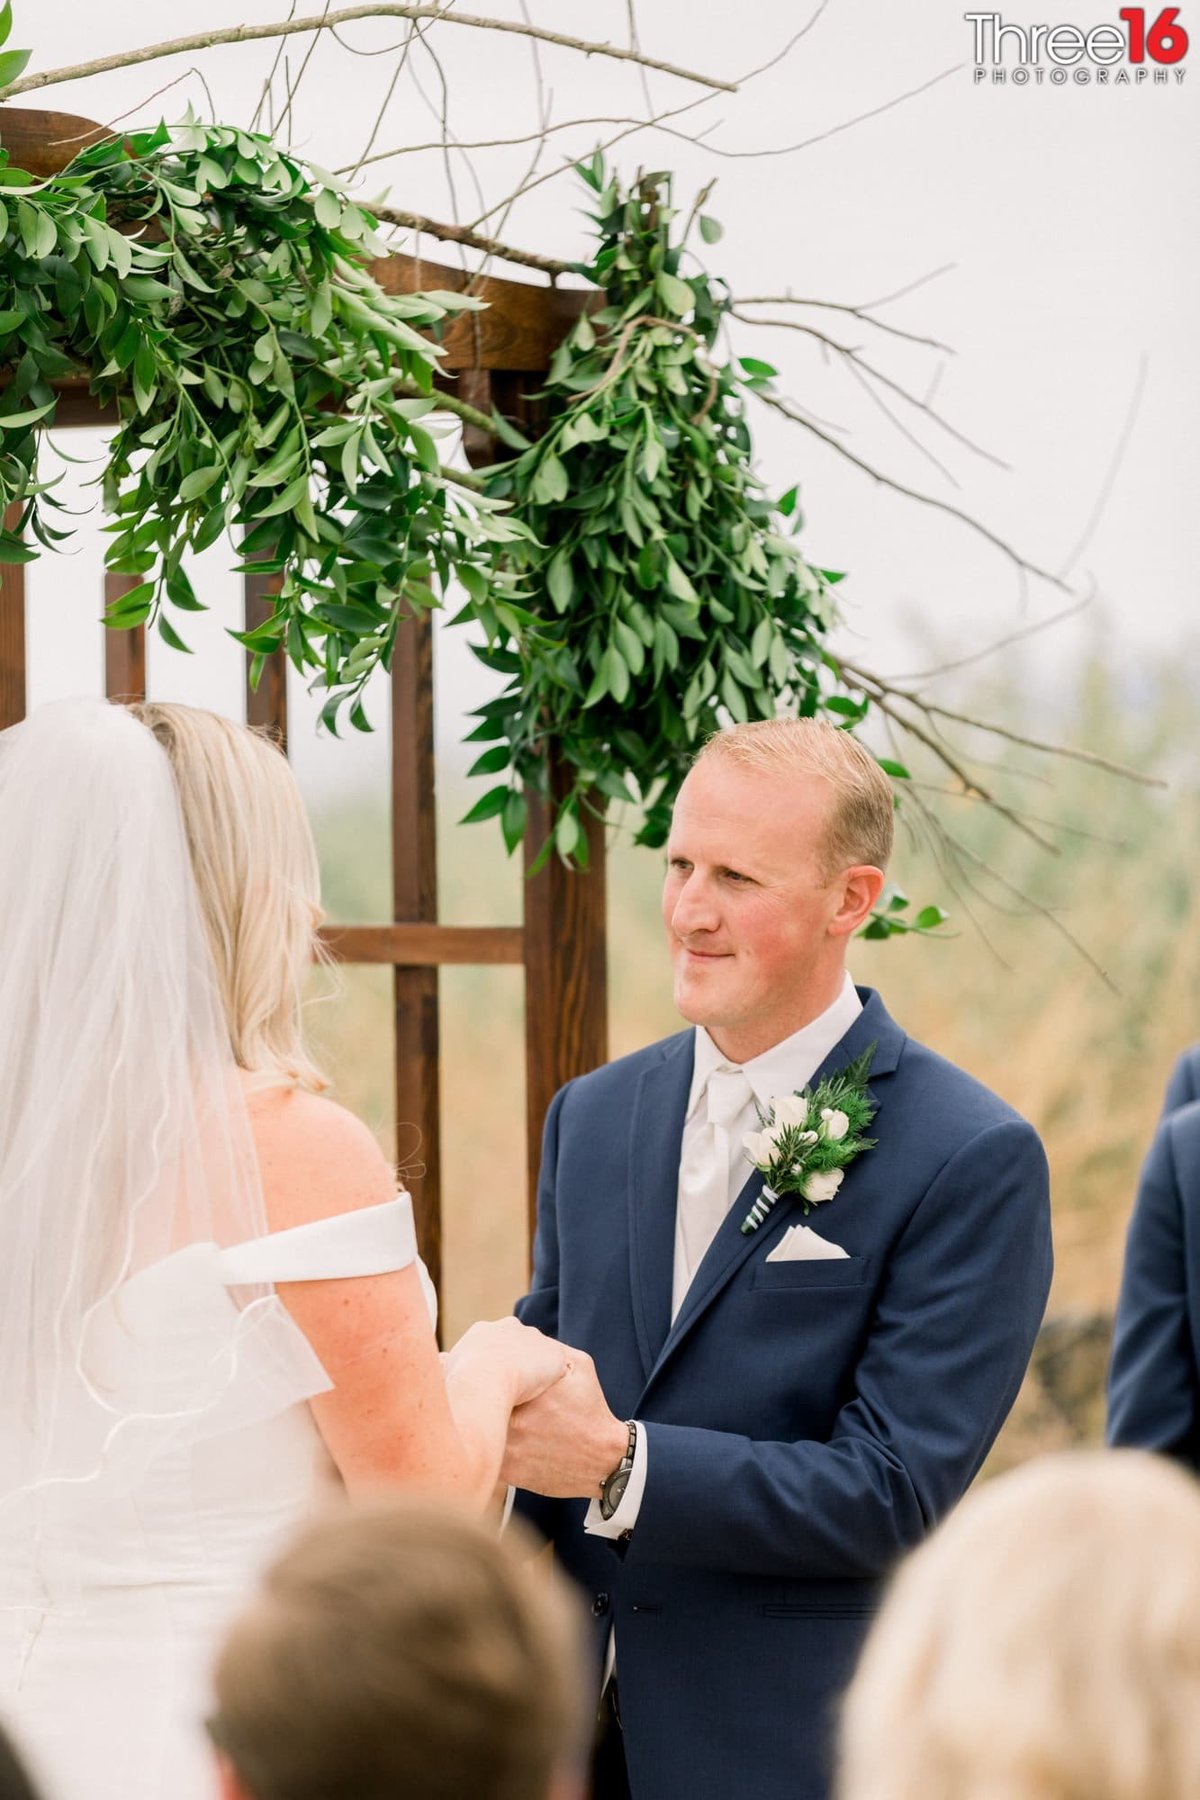 Groom looks at his Bride while holding her hands during the wedding ceremony